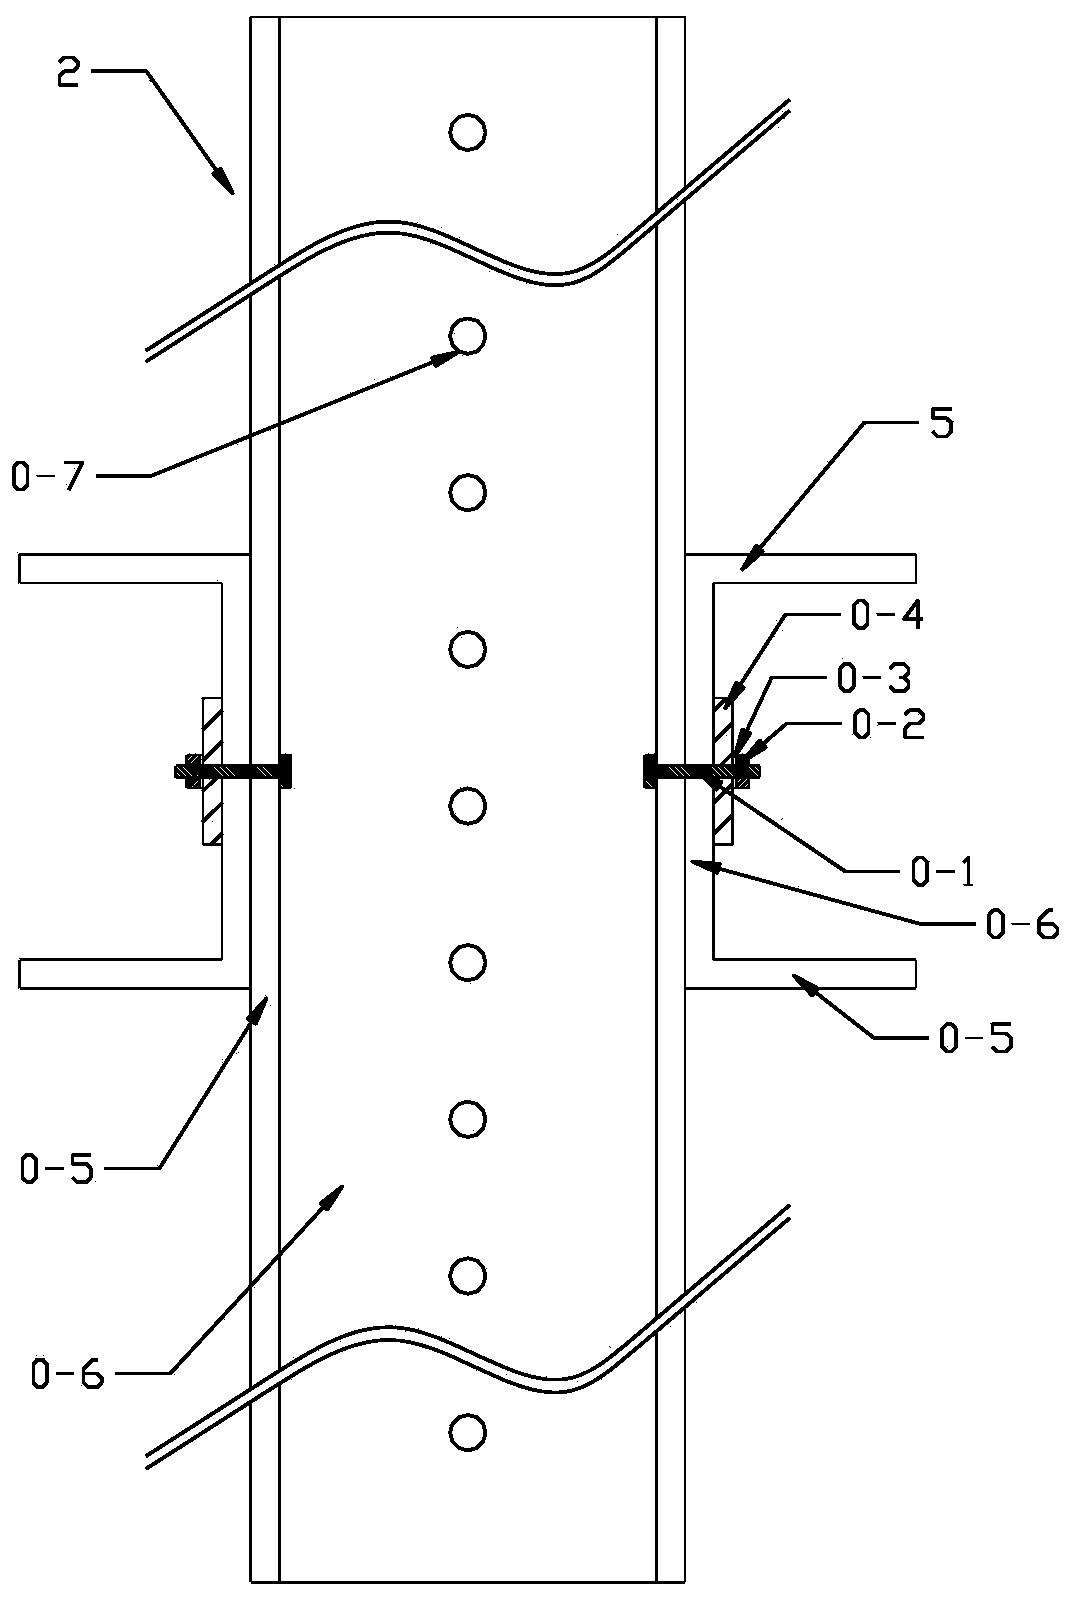 Confined aquifer fluid-solid coupling analog simulation experiment device